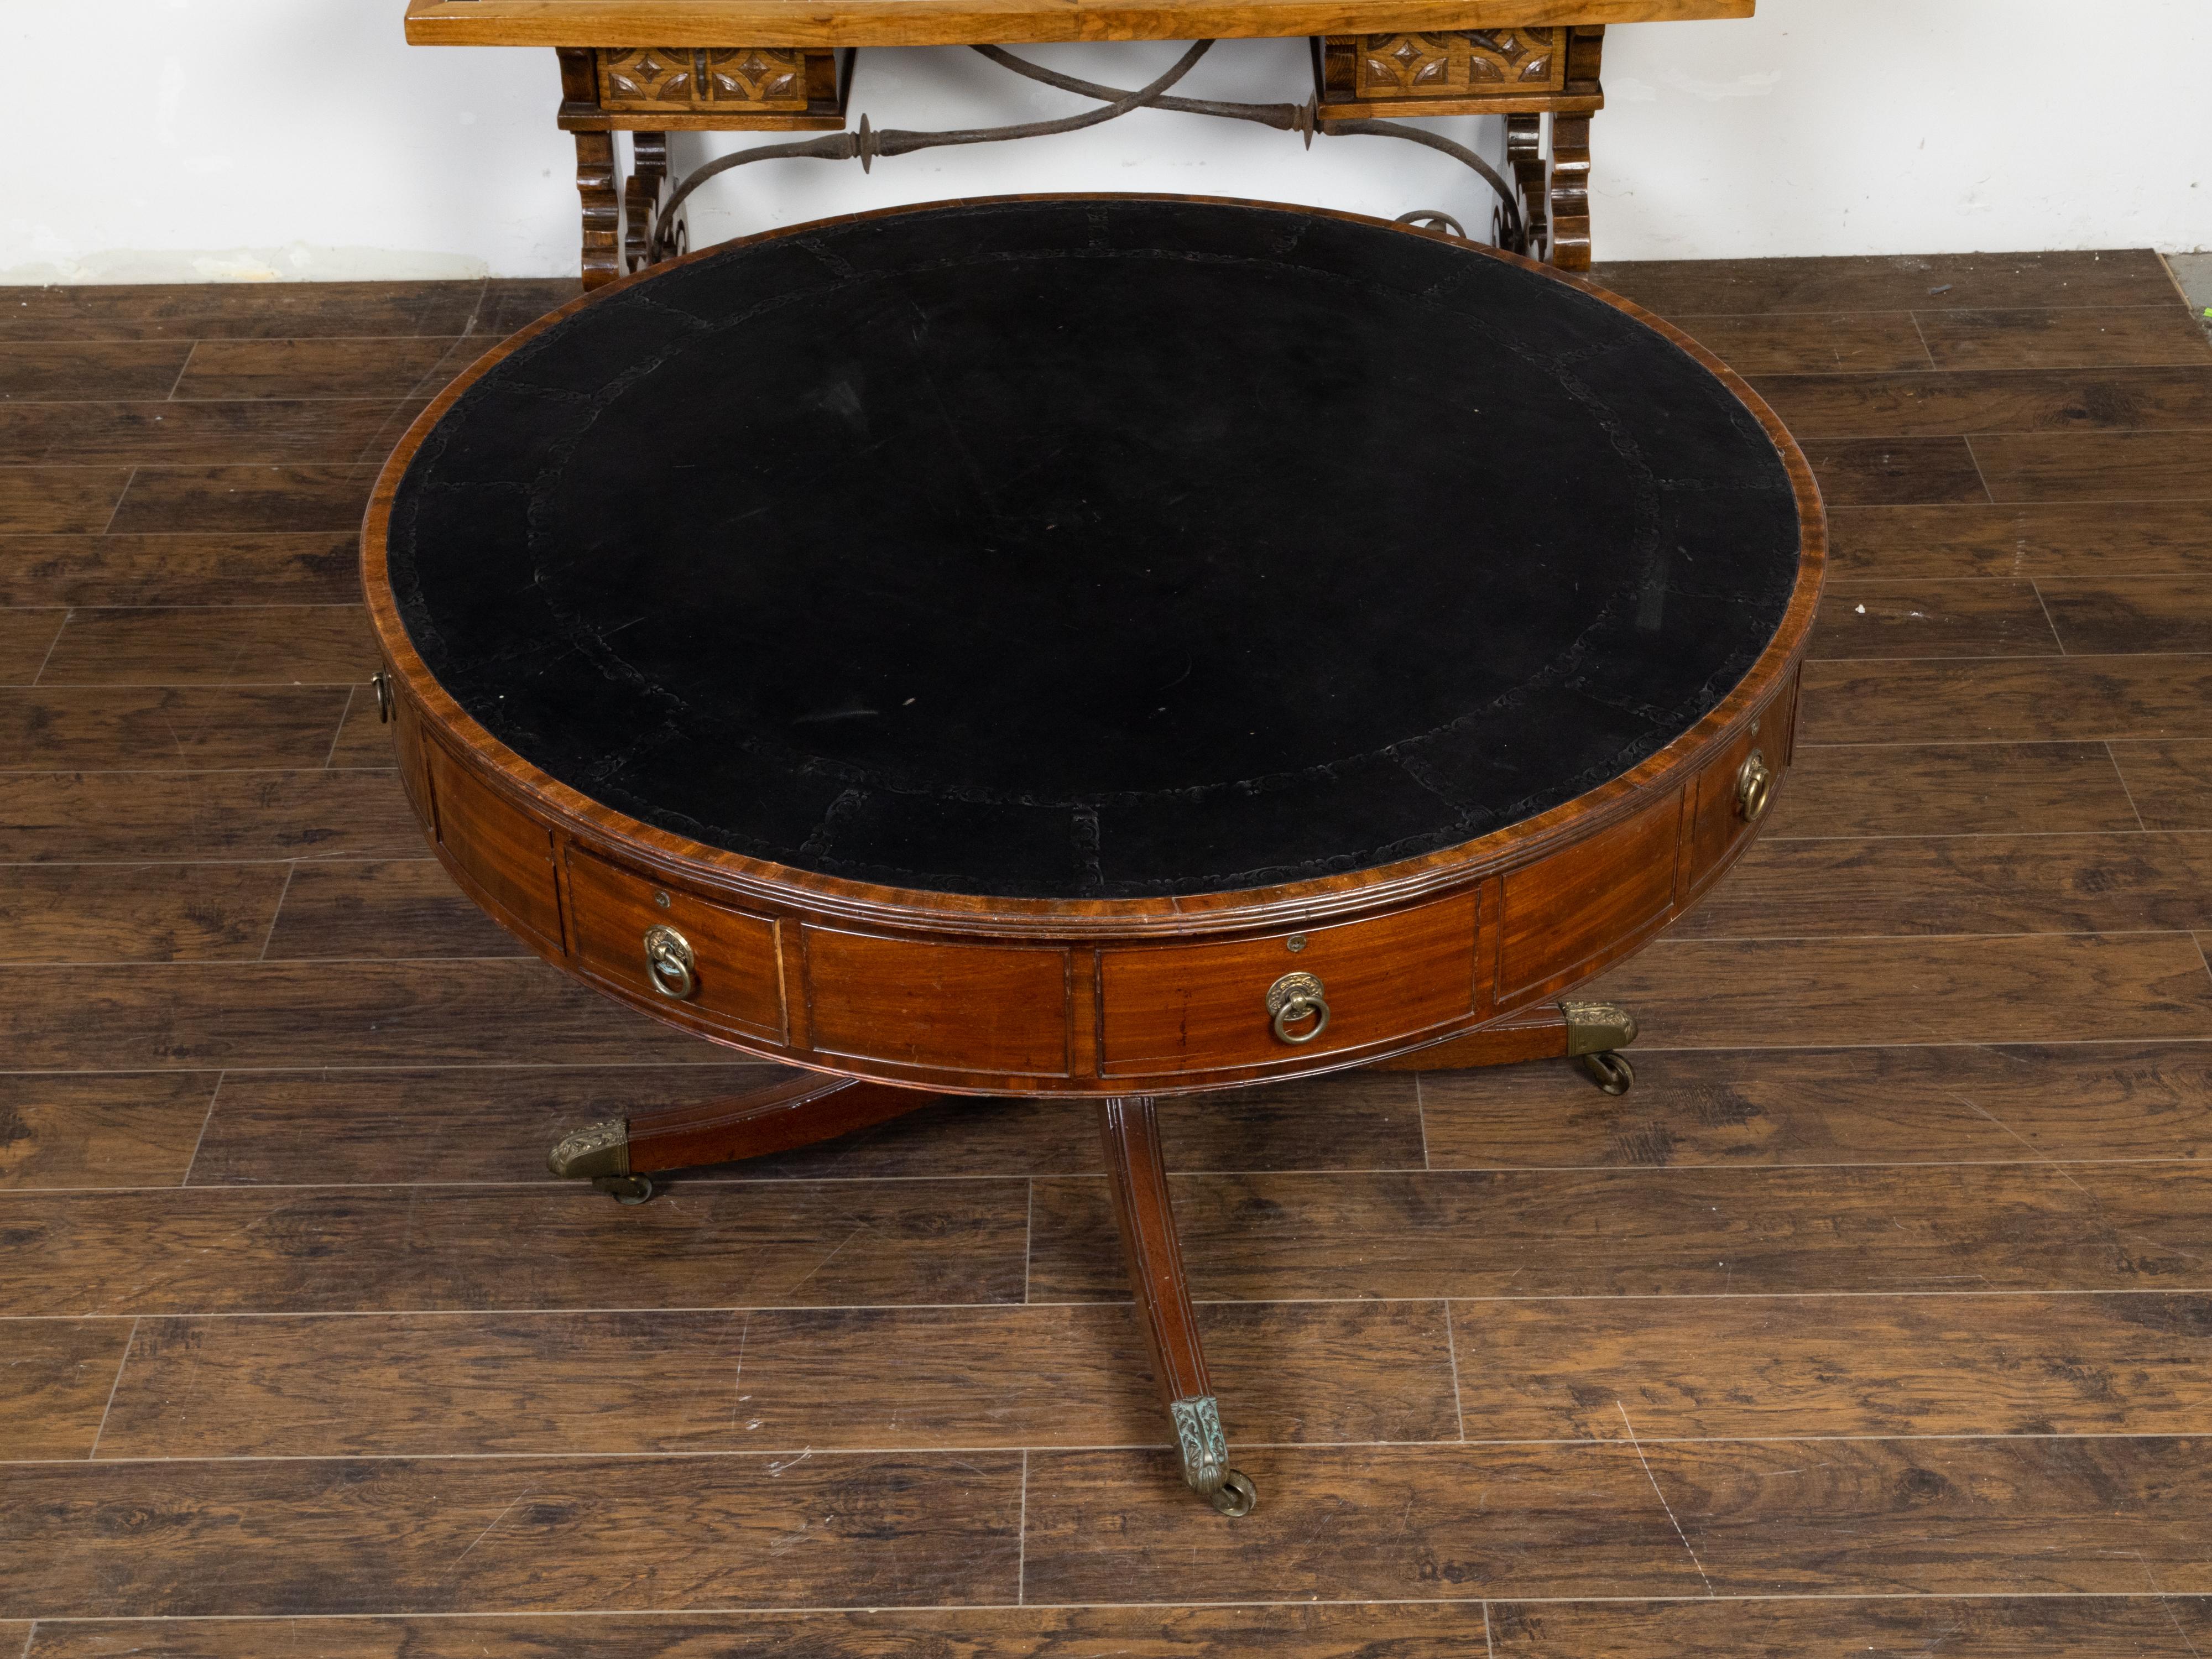 Embossed English Regency 1840s Mahogany Rent Table with Leather Top and Eight Drawers For Sale